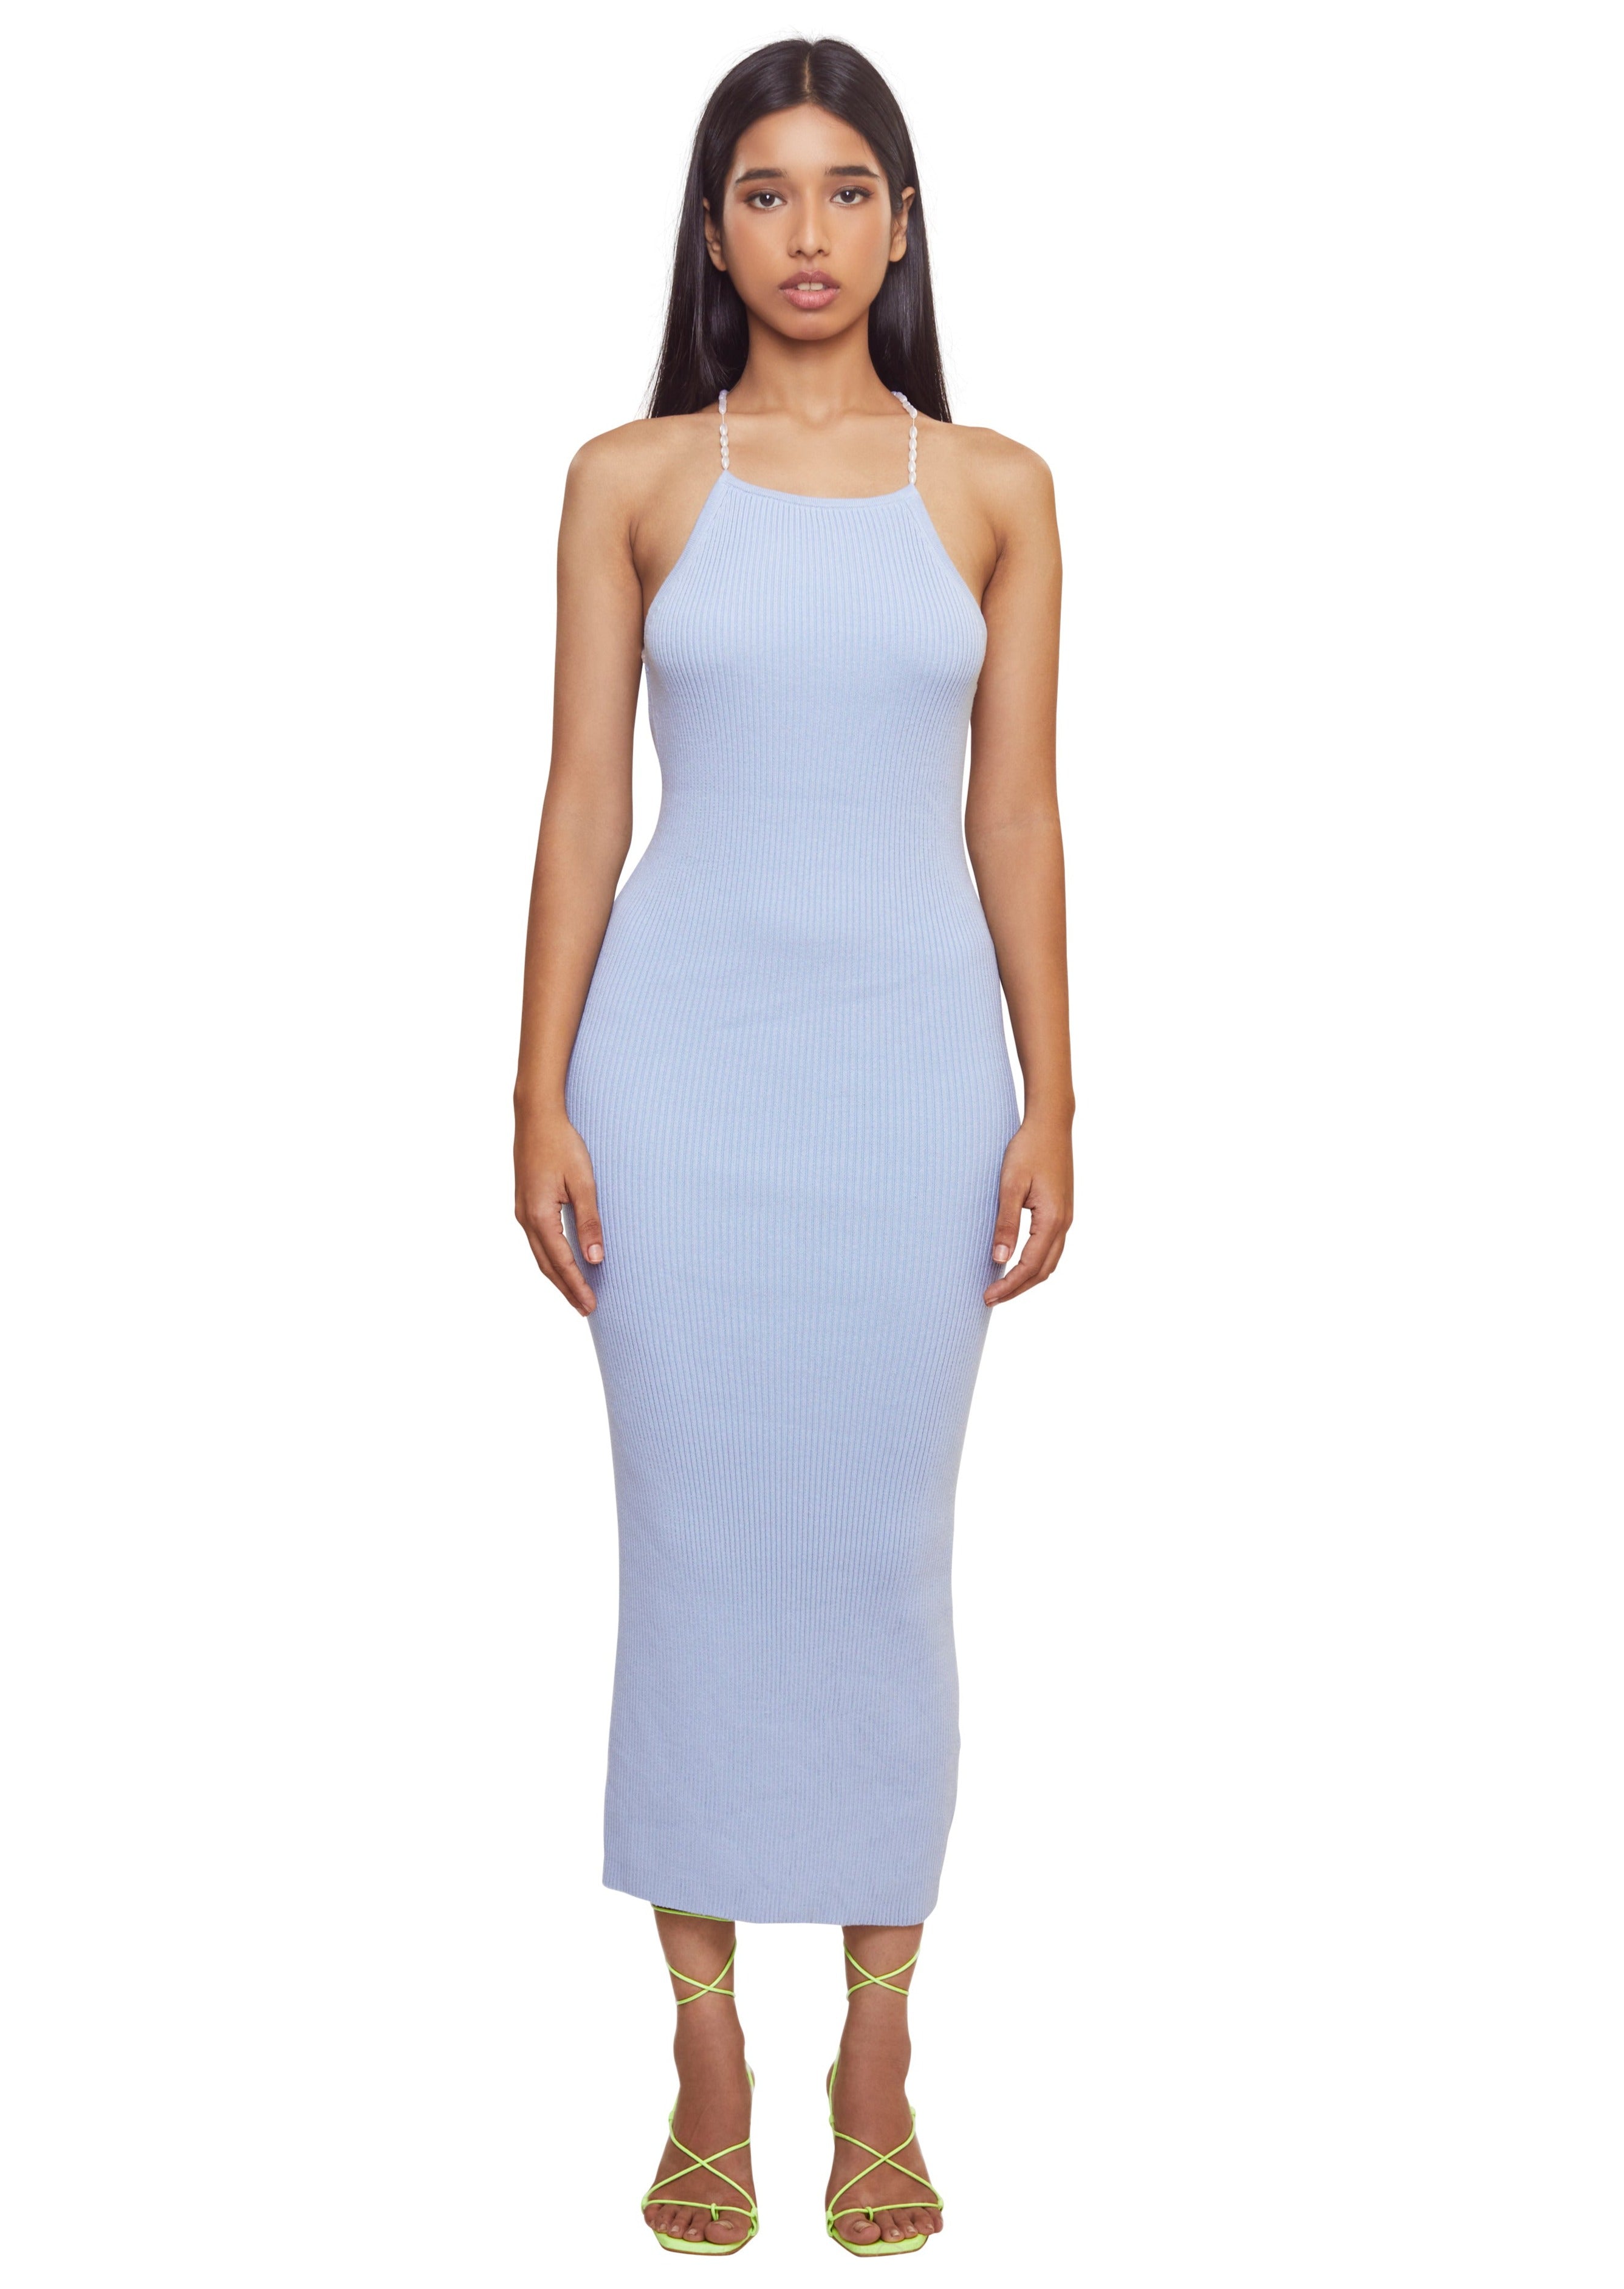 Blue midi backless dress with white piping, knitted ribs and Stretchable straps in white pearls, crossed at back from the brand Musier